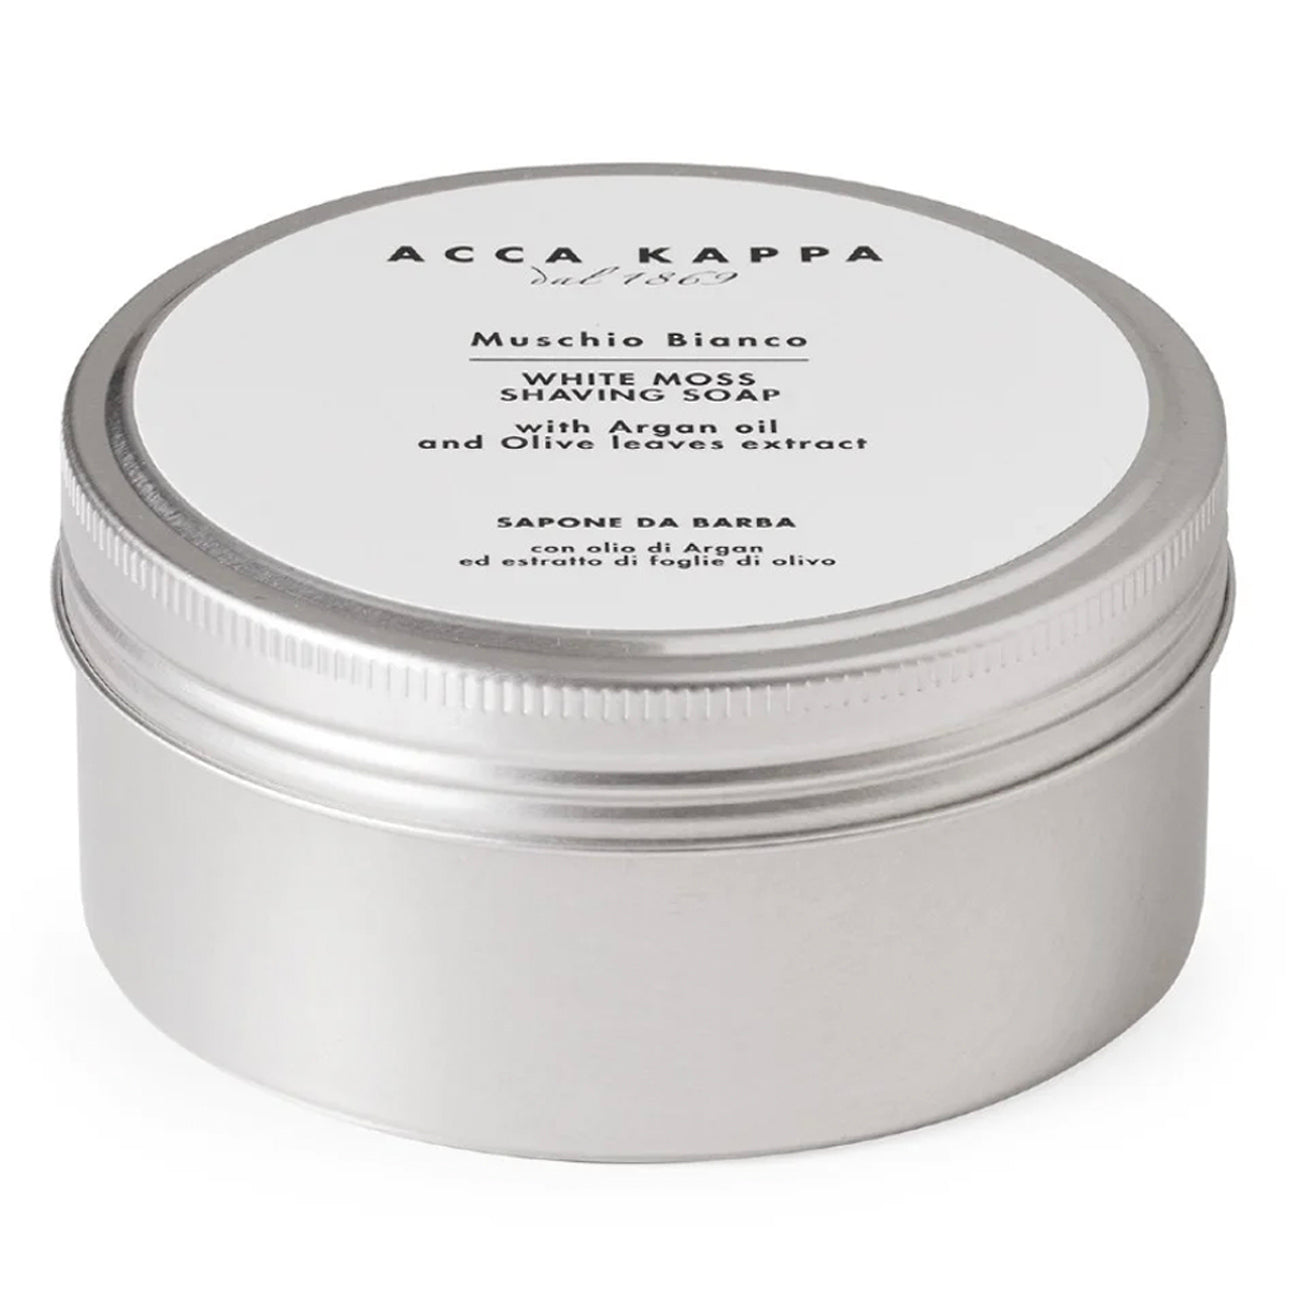 Acca Kappa White Moss Shave Soap - Silver Tin